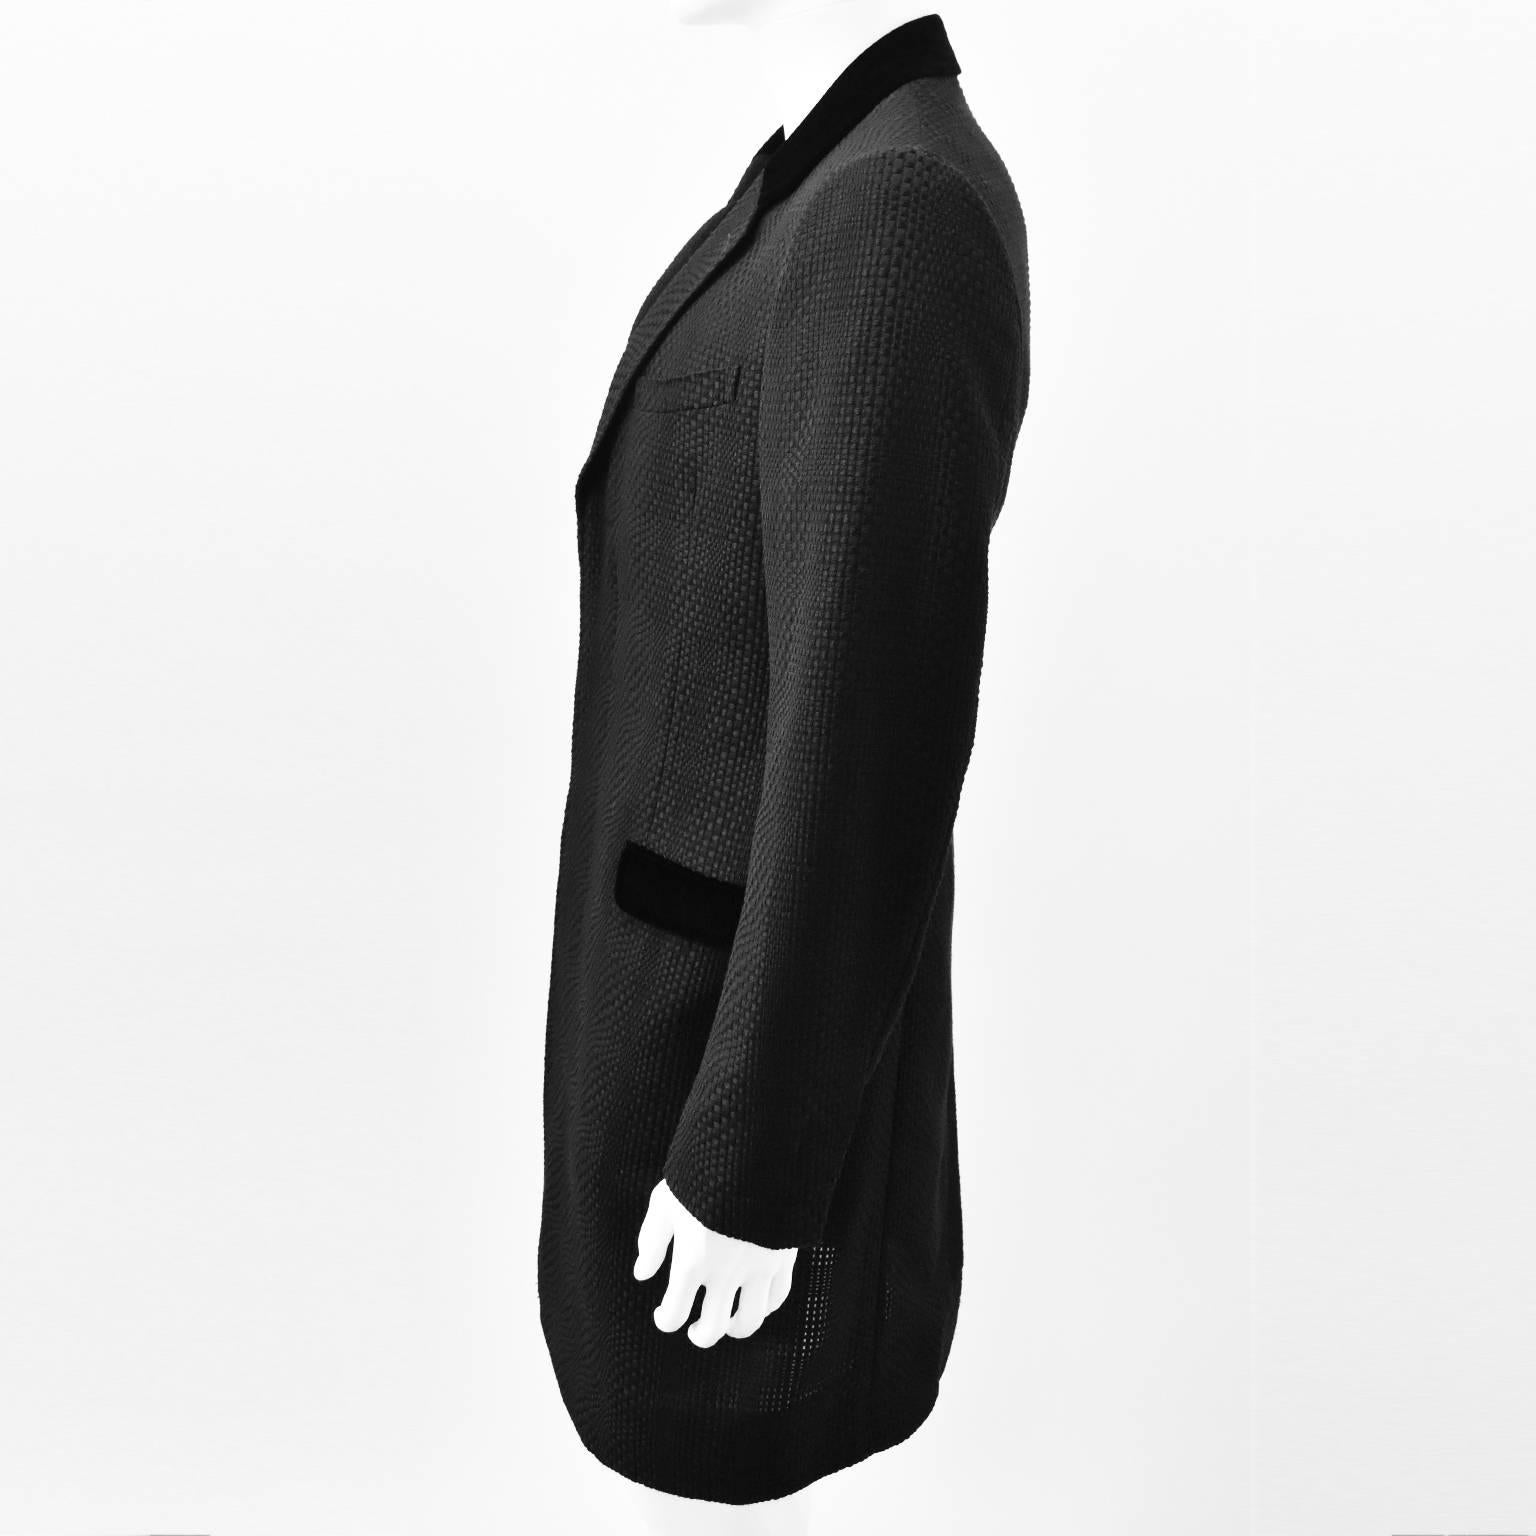 Alexander McQueen Black Woven Coat with Contrast Velvet Collar and Pockets S/S 1 In Good Condition For Sale In London, GB